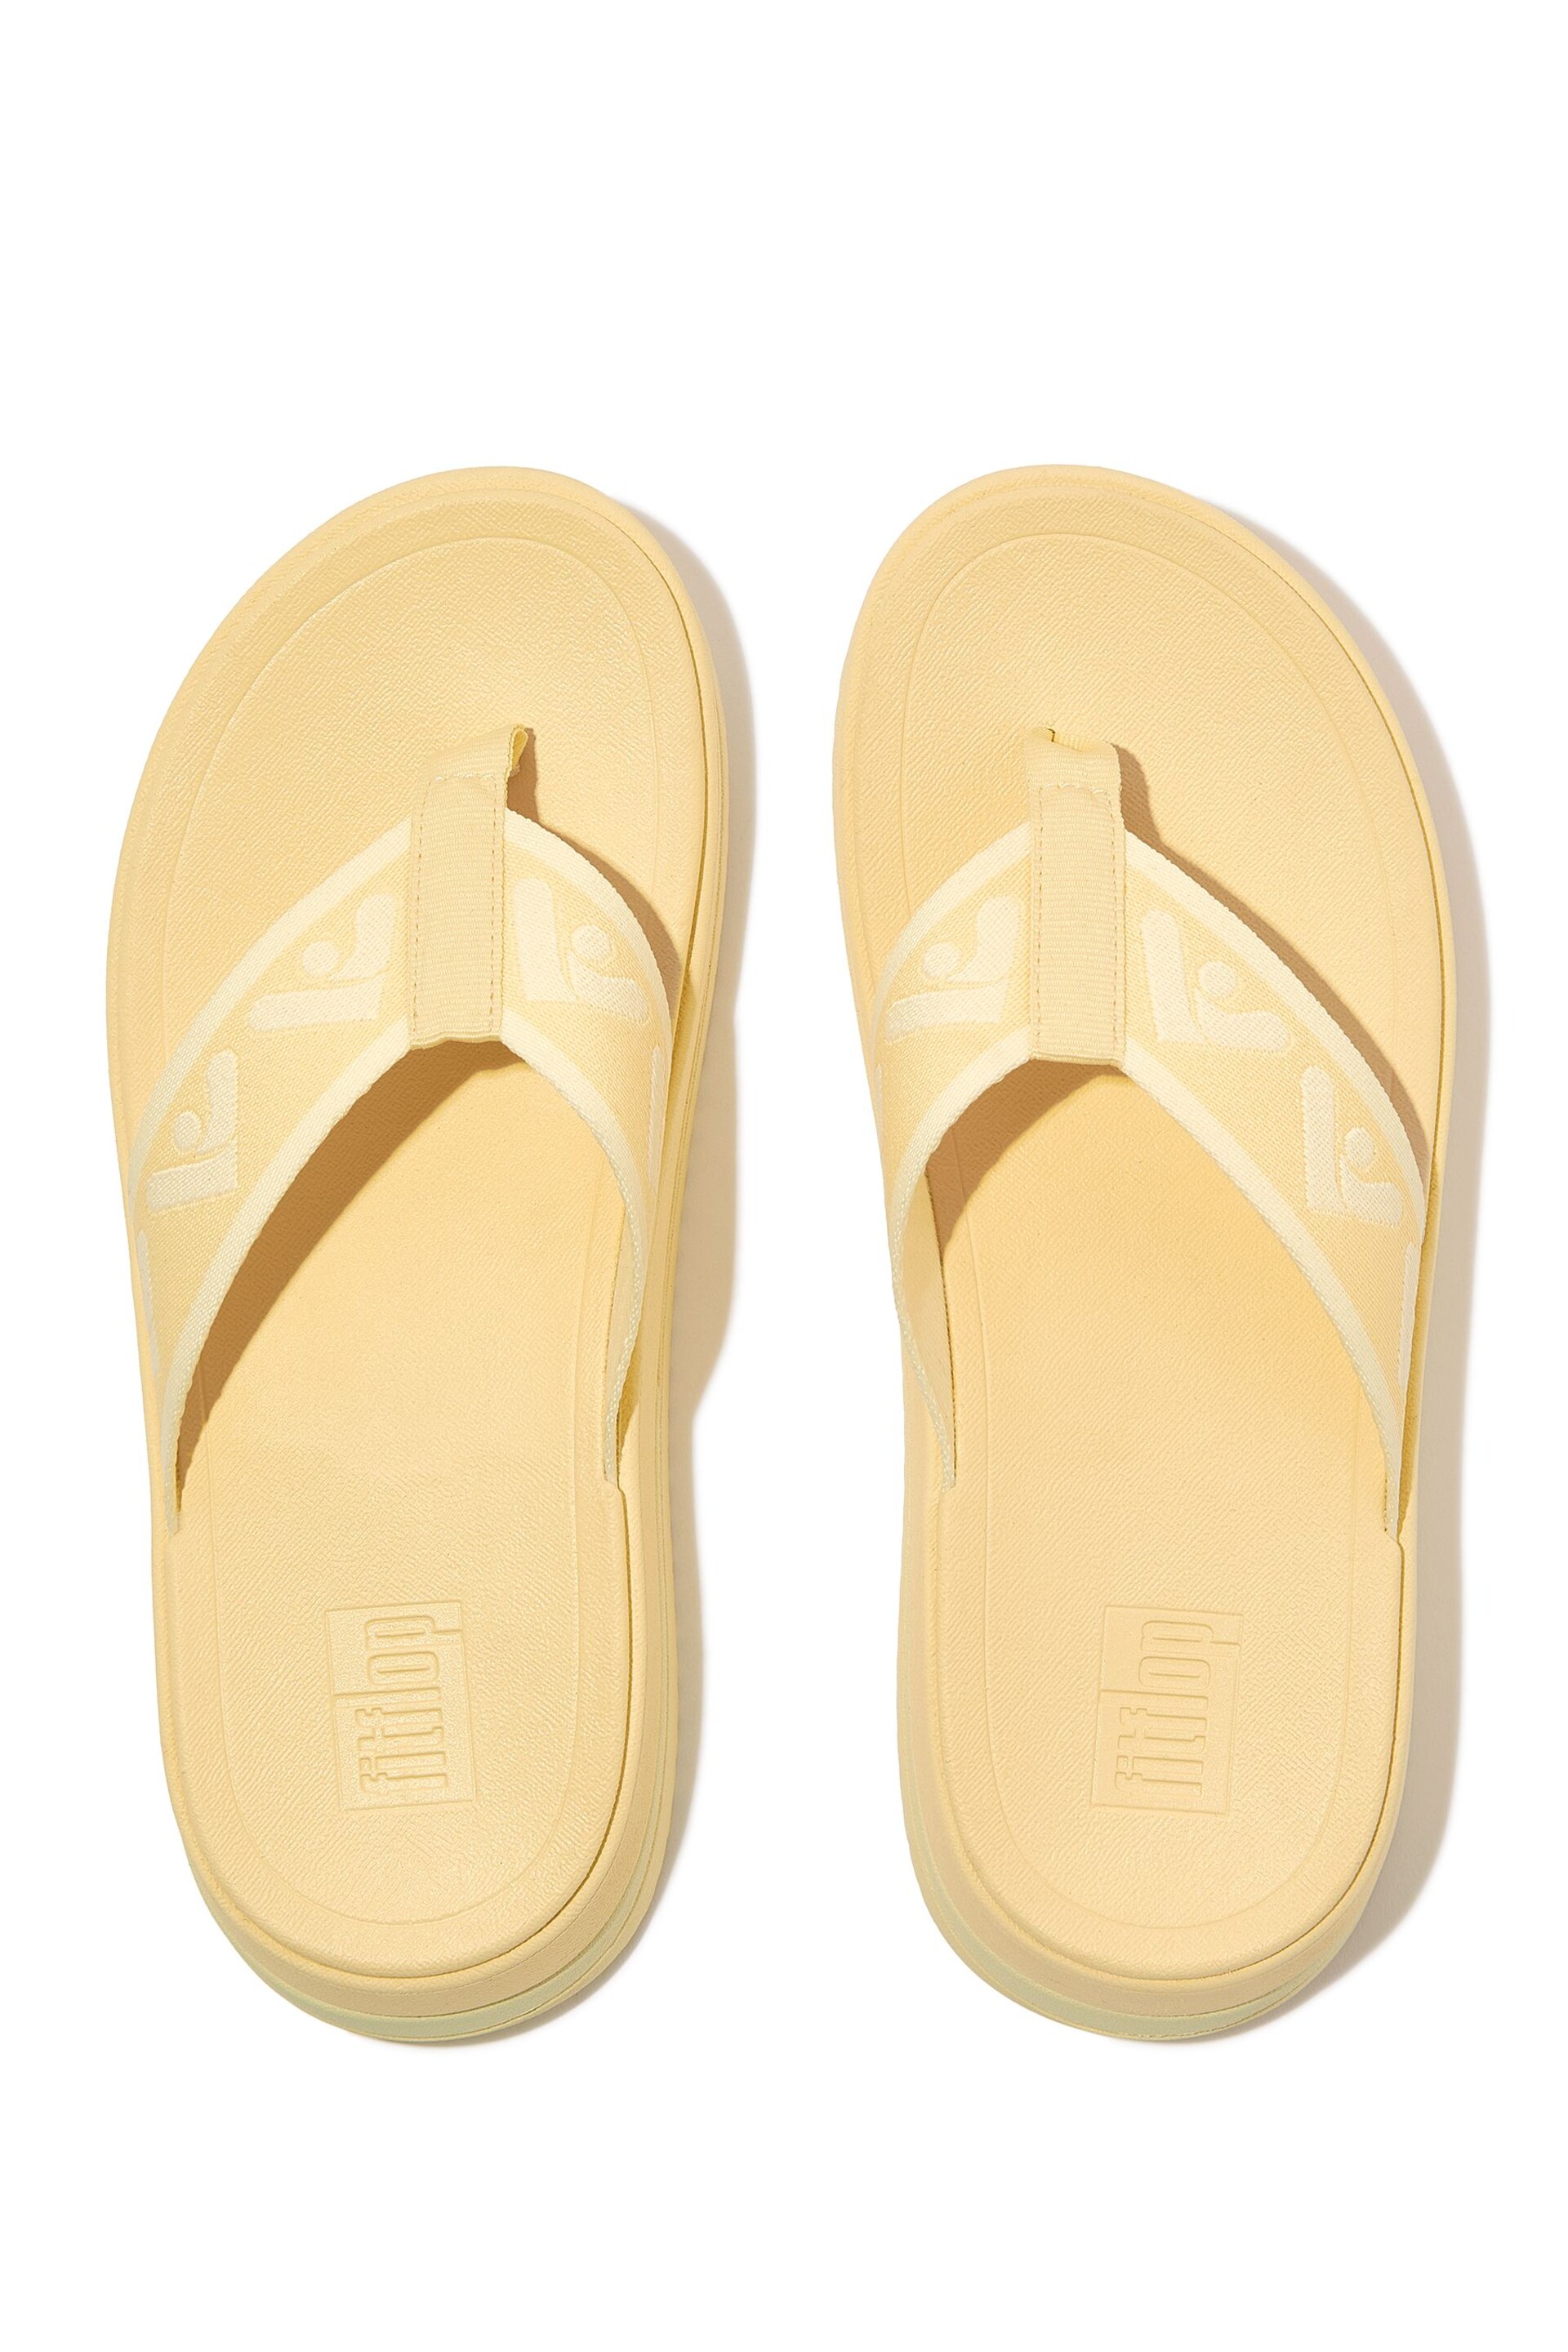 FitFlop Yellow Surff Webbing Toe-Post Sandals - Image 4 of 4